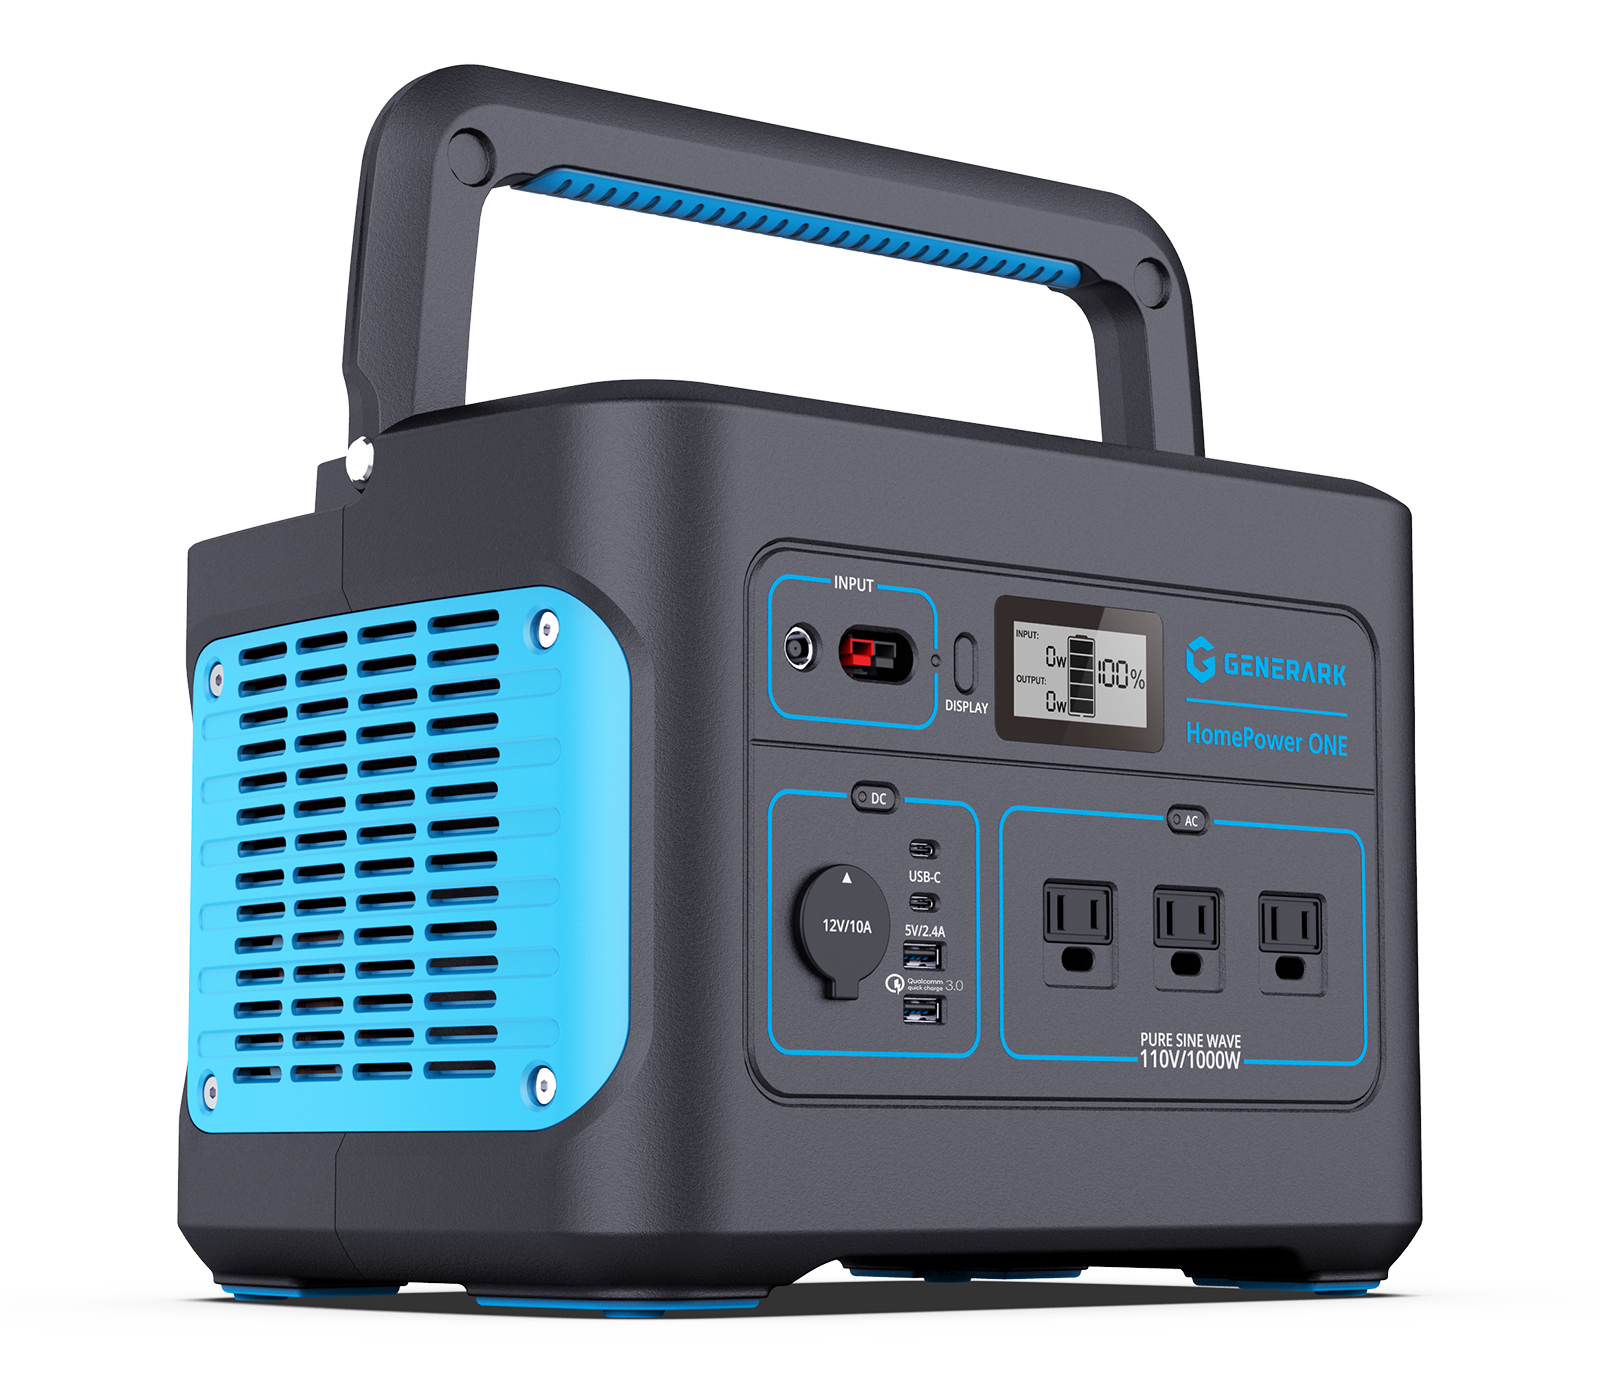 Top 5 Reasons to Purchase the HomePower ONE Emergency Power Supply